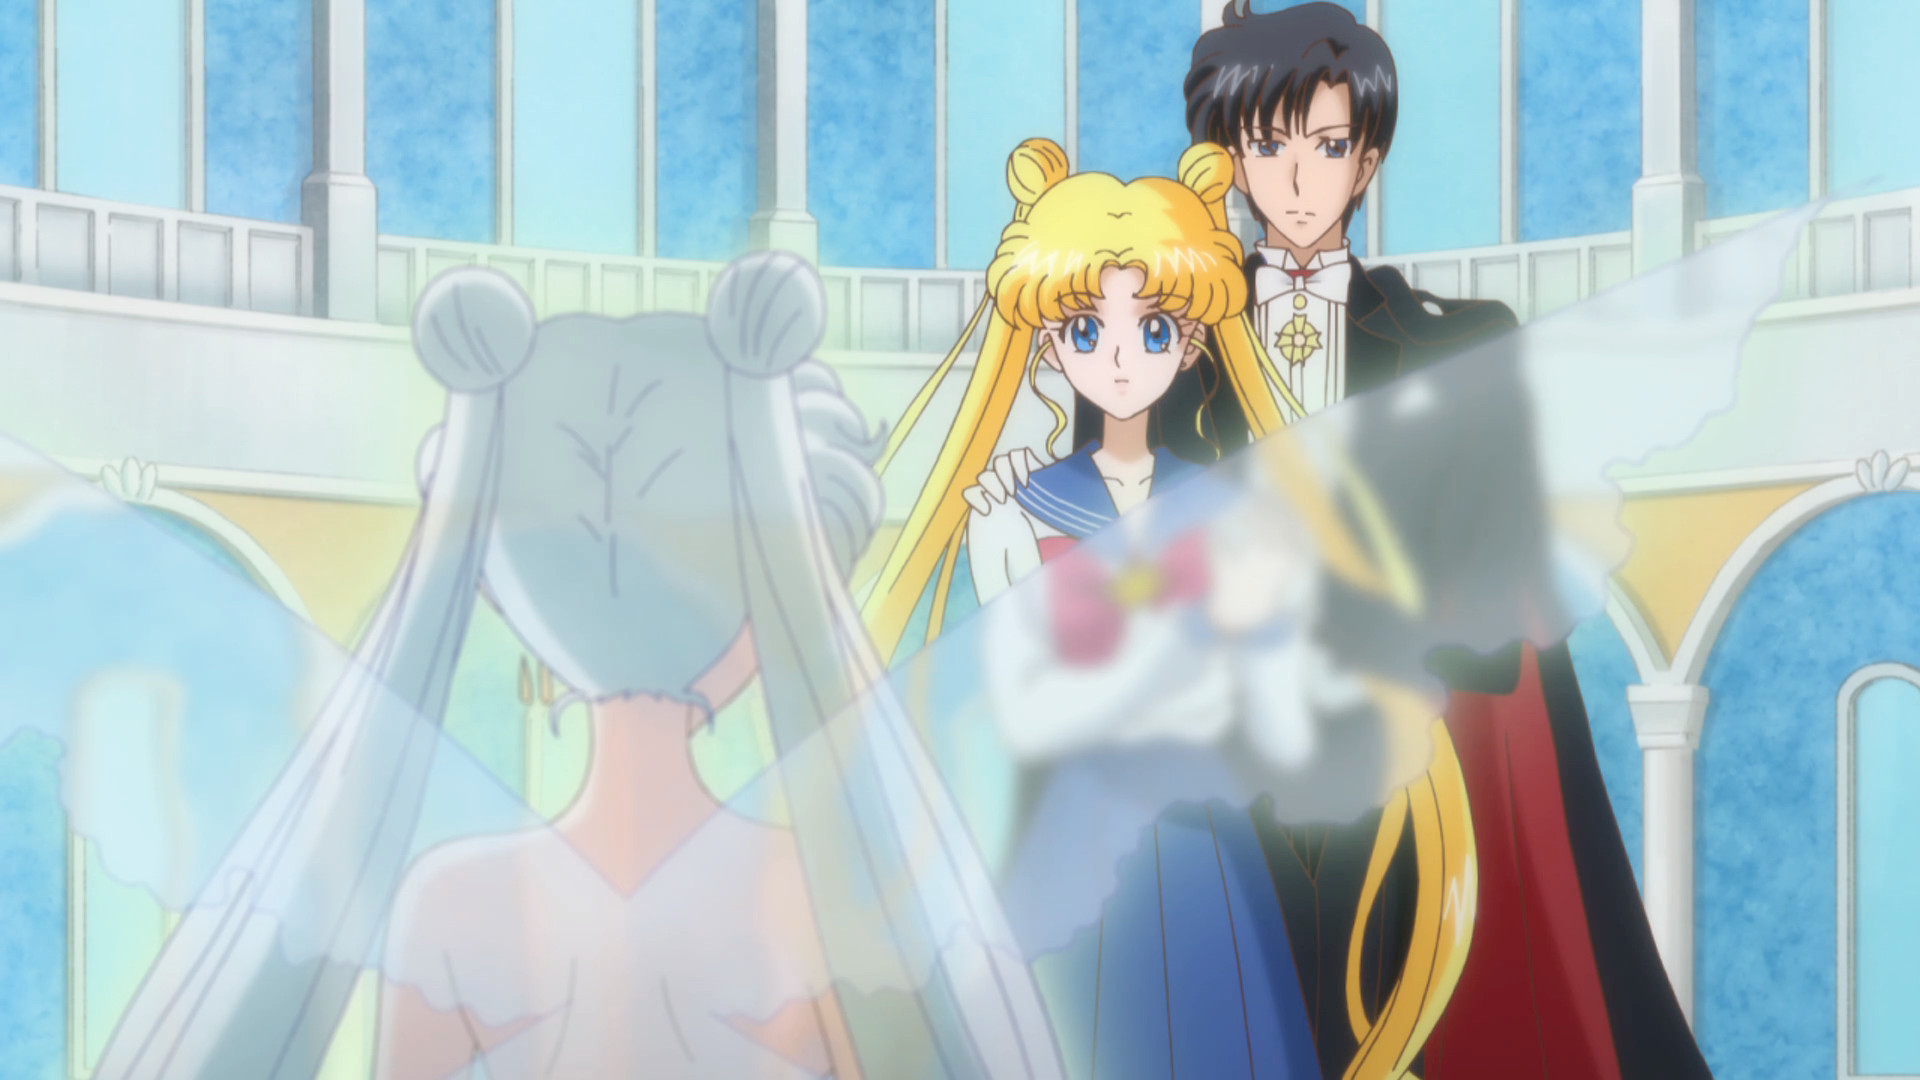 1080 in Sailor Moon Crystal Act 14, Conclusion and Commencement